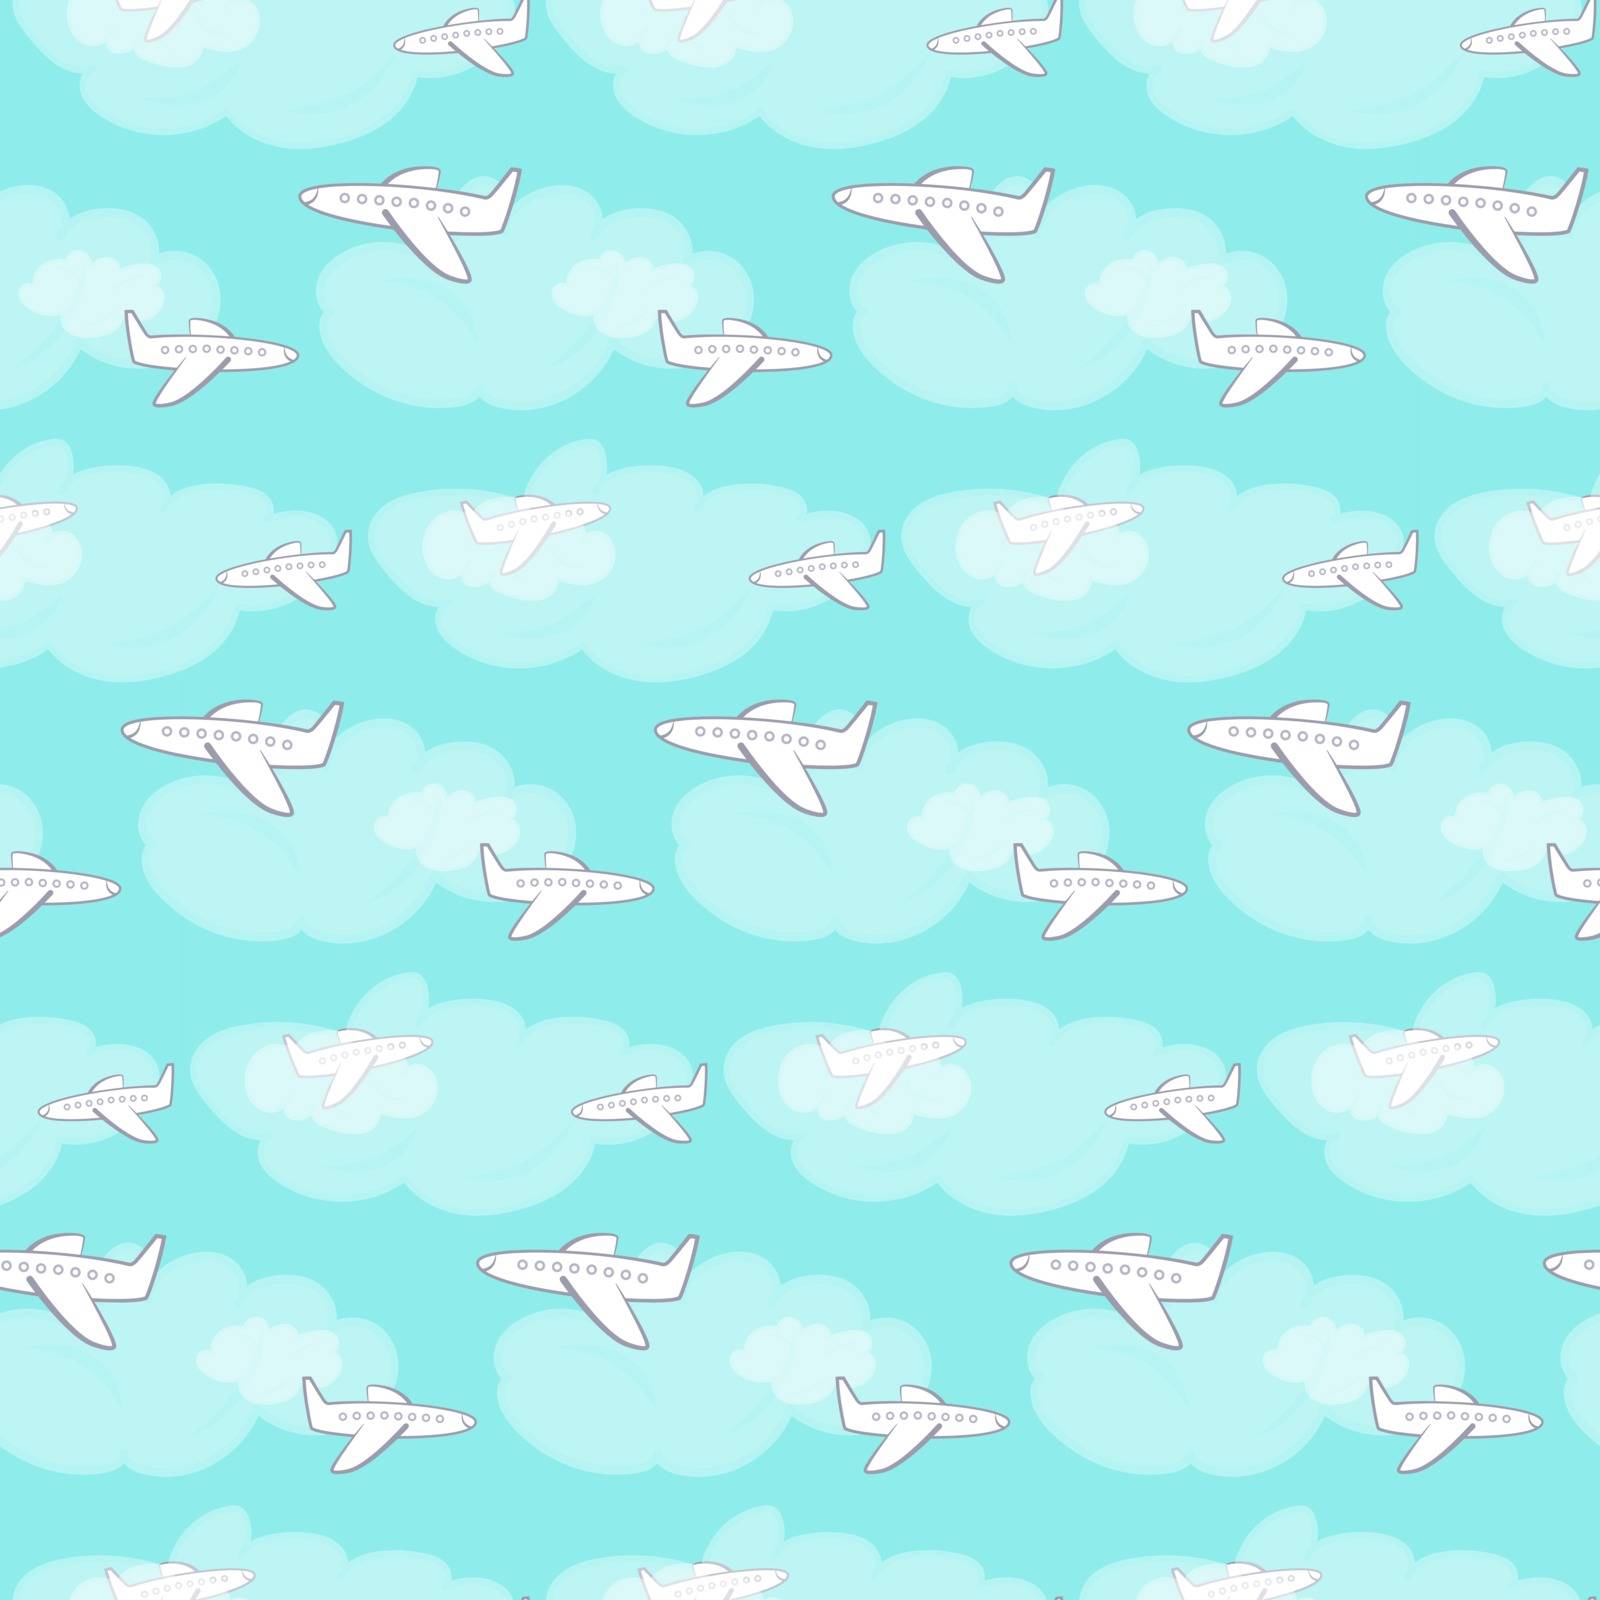 Seamless sky pattern with white planes and clouds, kids pattern with airplanes